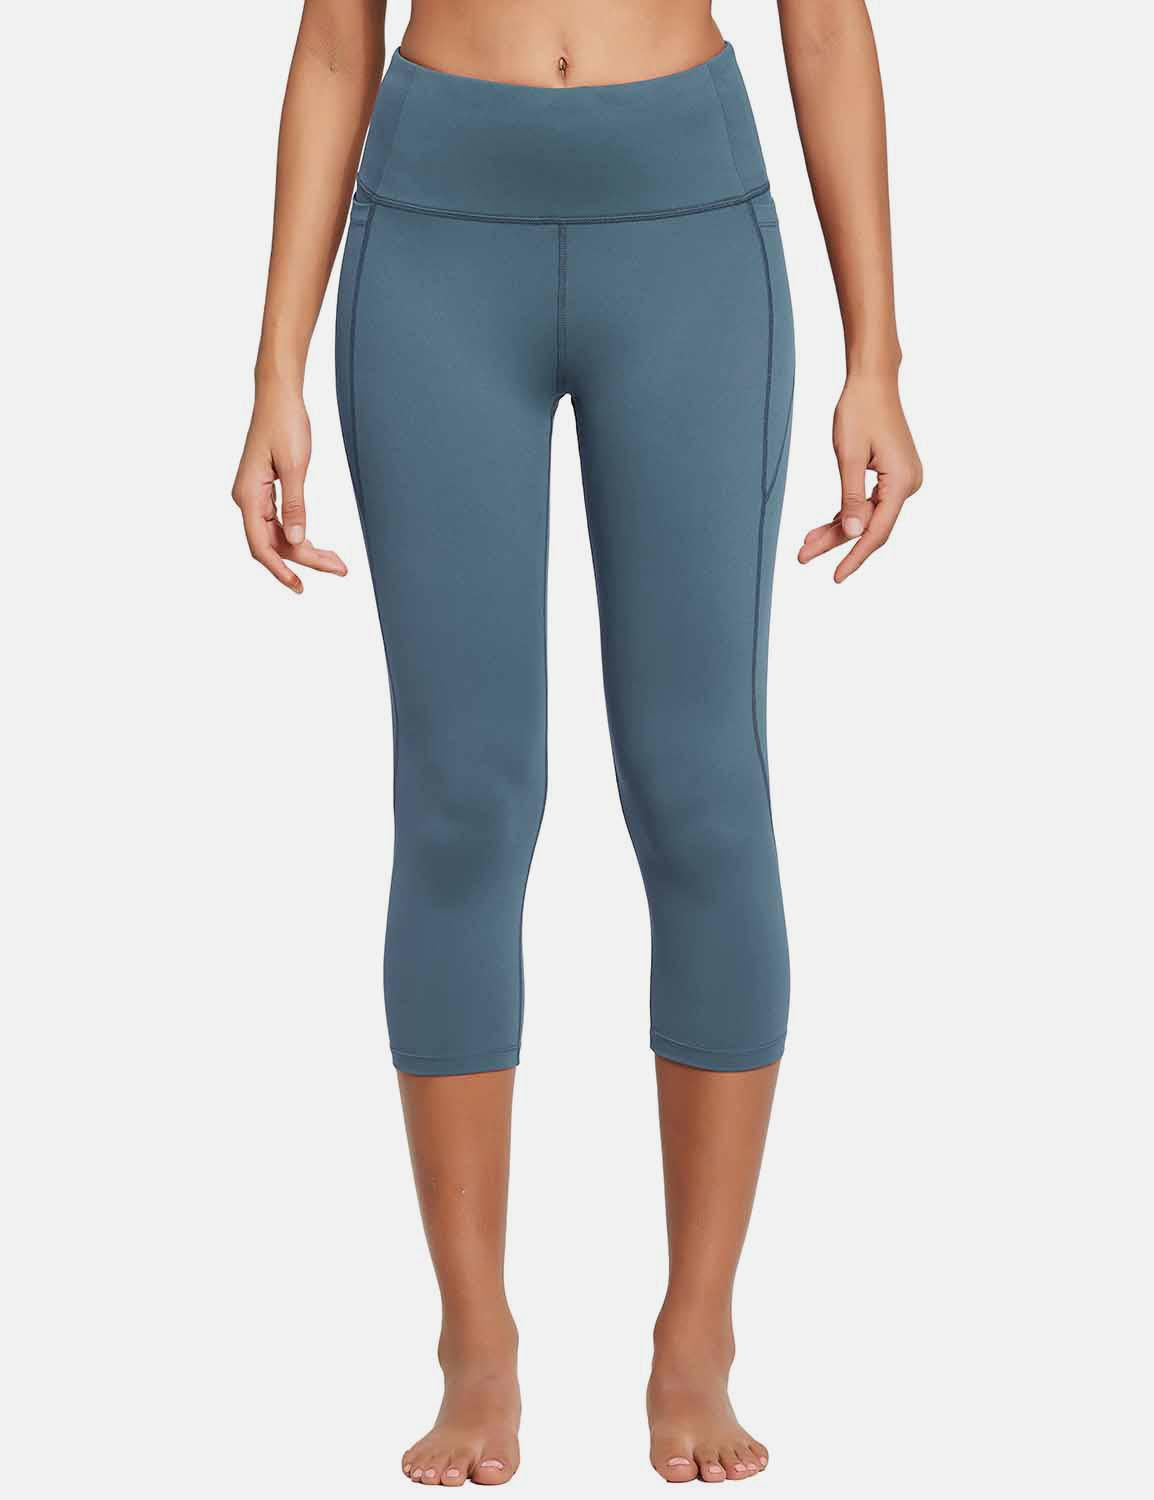 Baleaf Women's High Rise Bottom Contour Pocketed Capris abh168 Blue Fusion Front